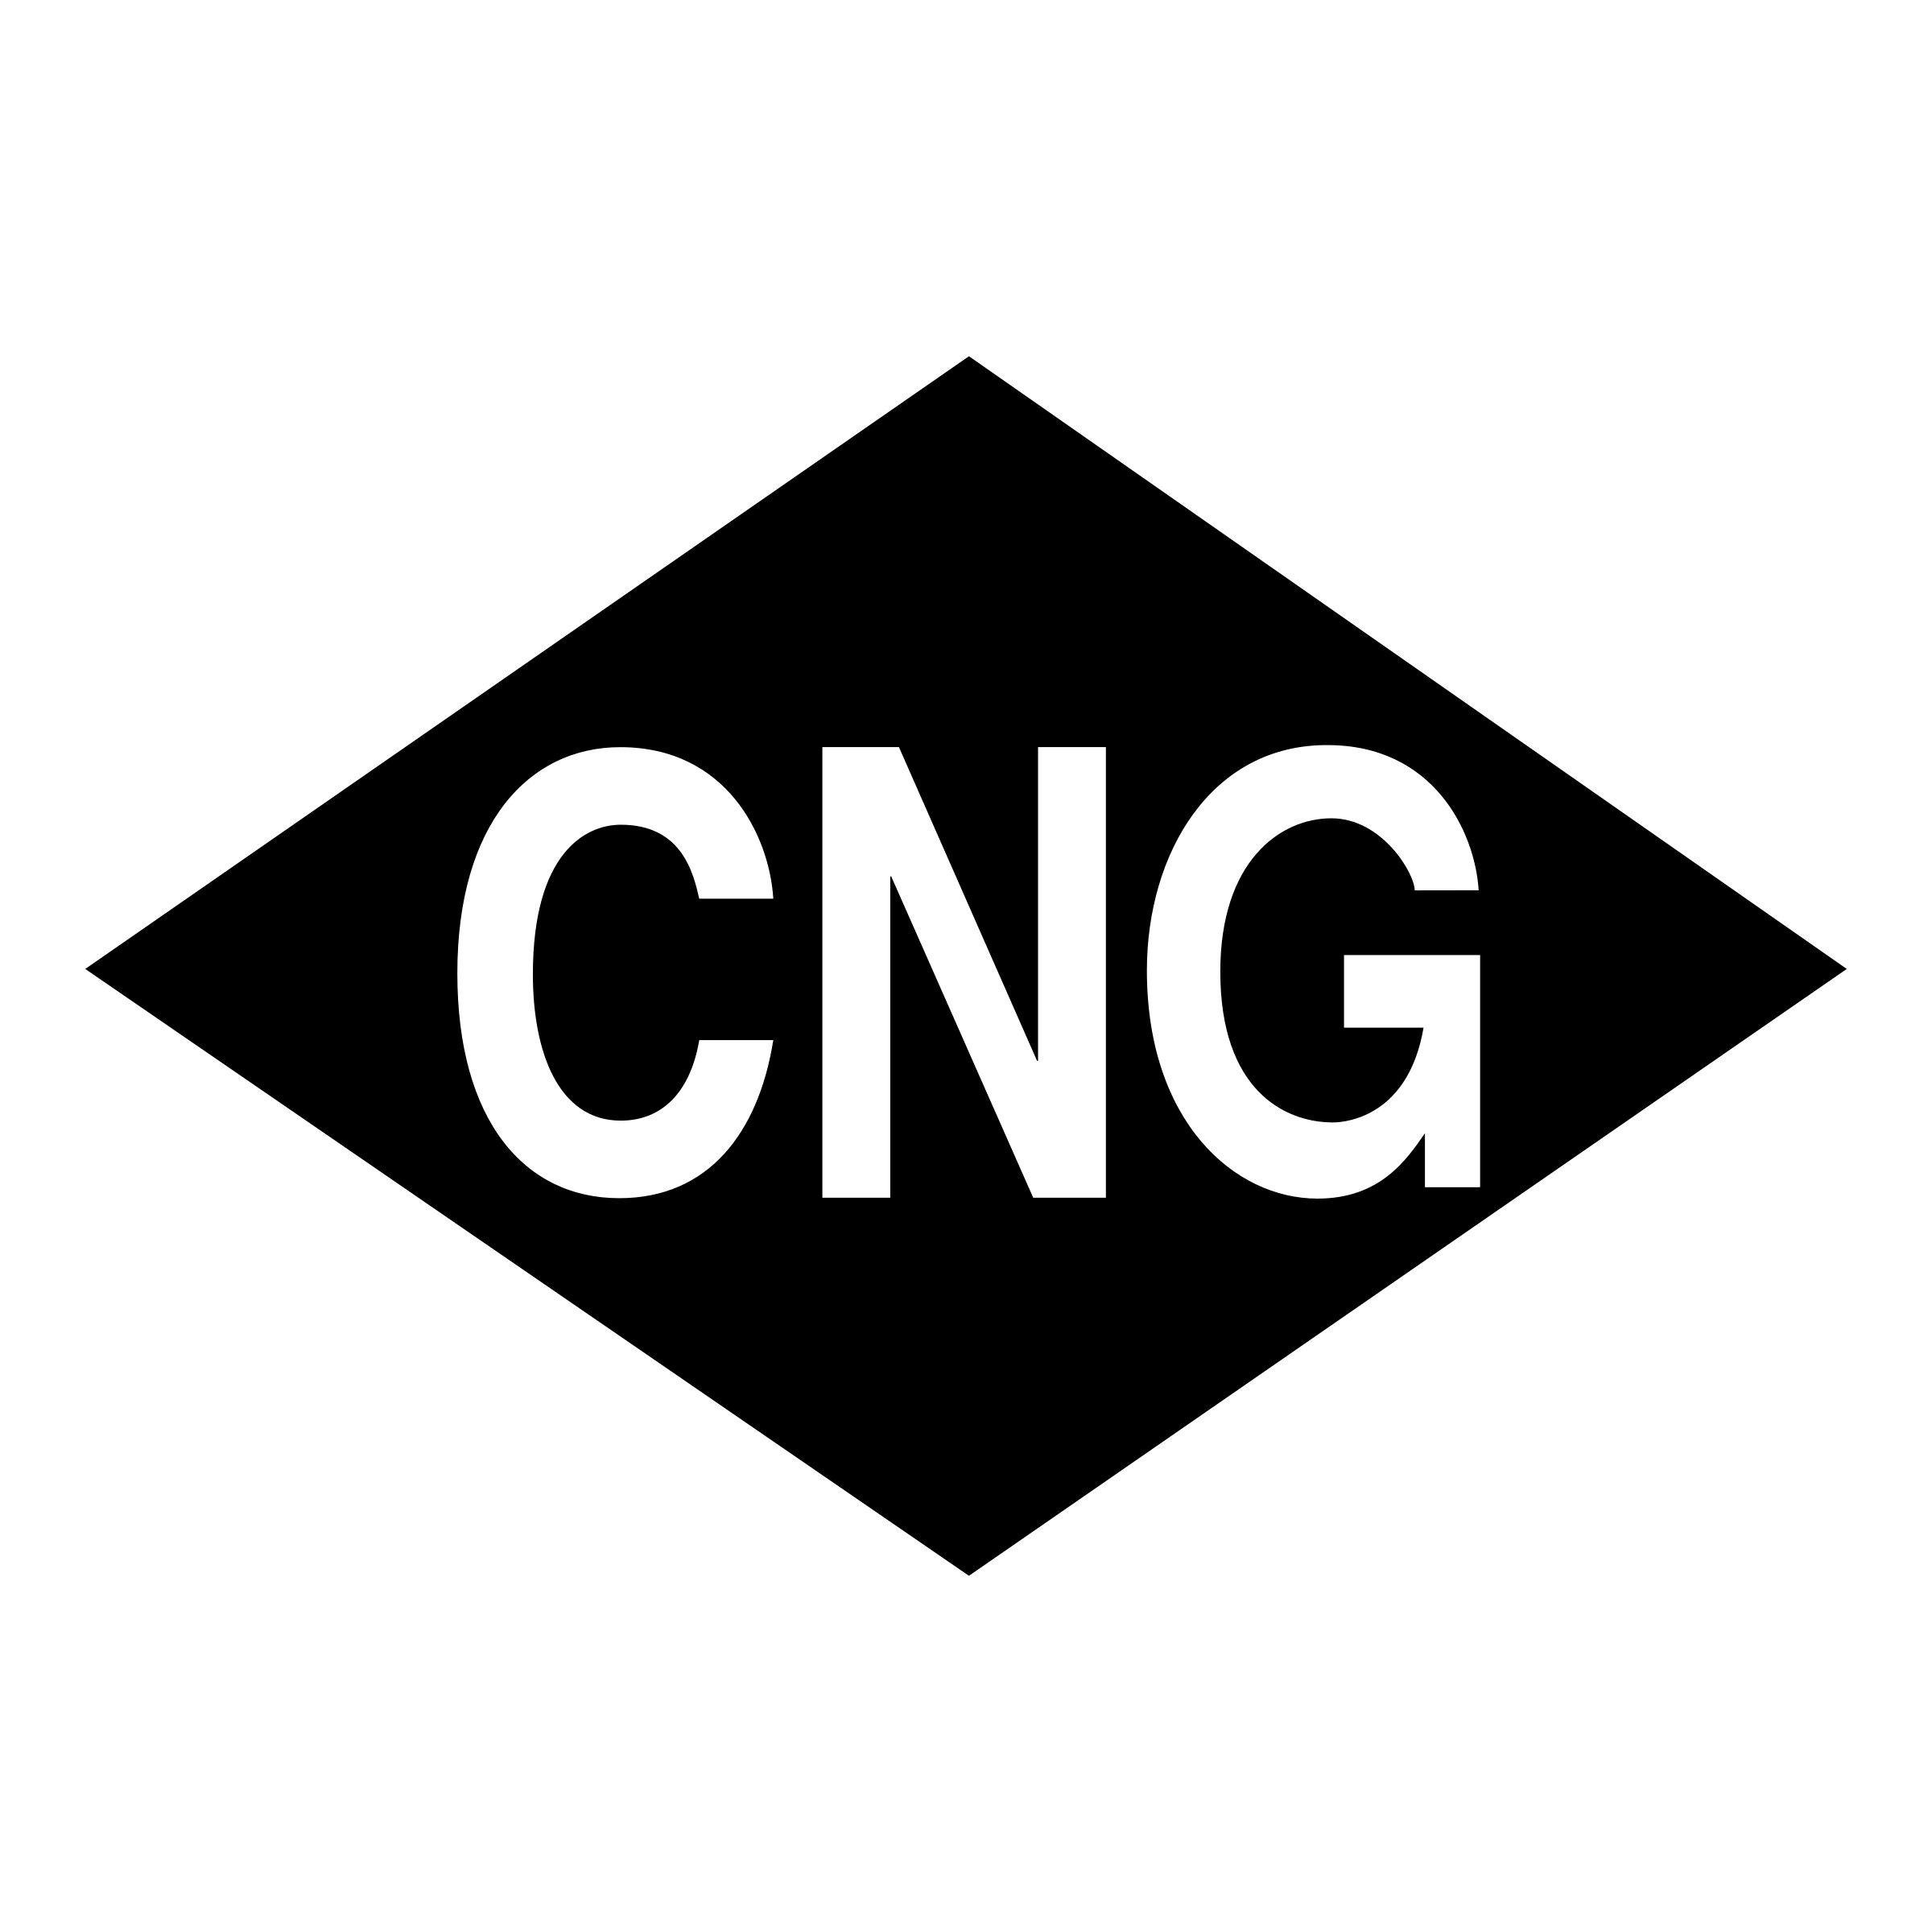 Cng Logo PNG Image High Quality PNG Image